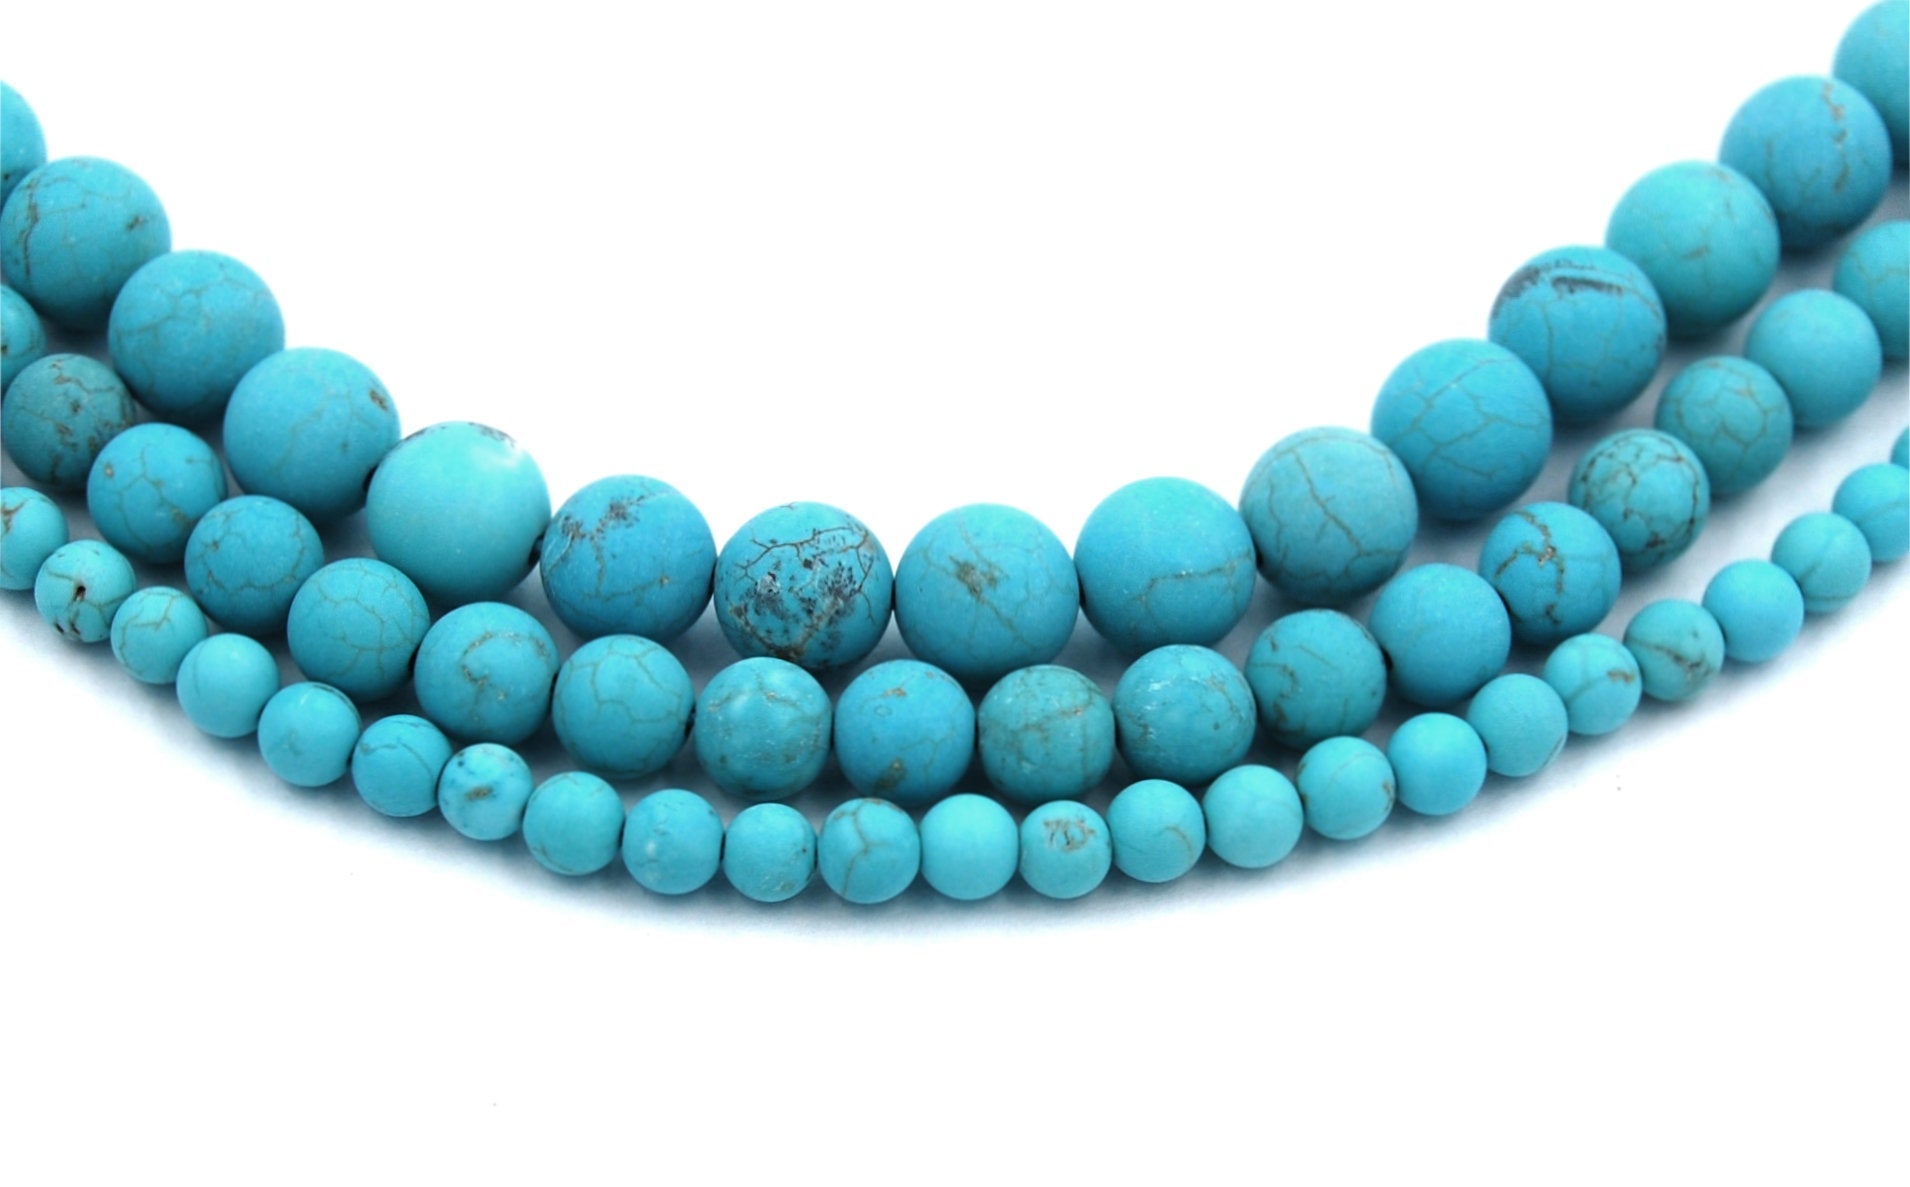 Matte Turquoise Howlite 4mm, 6mm, 8mm, 10mm, 12mm Round Beads -15 inch strand